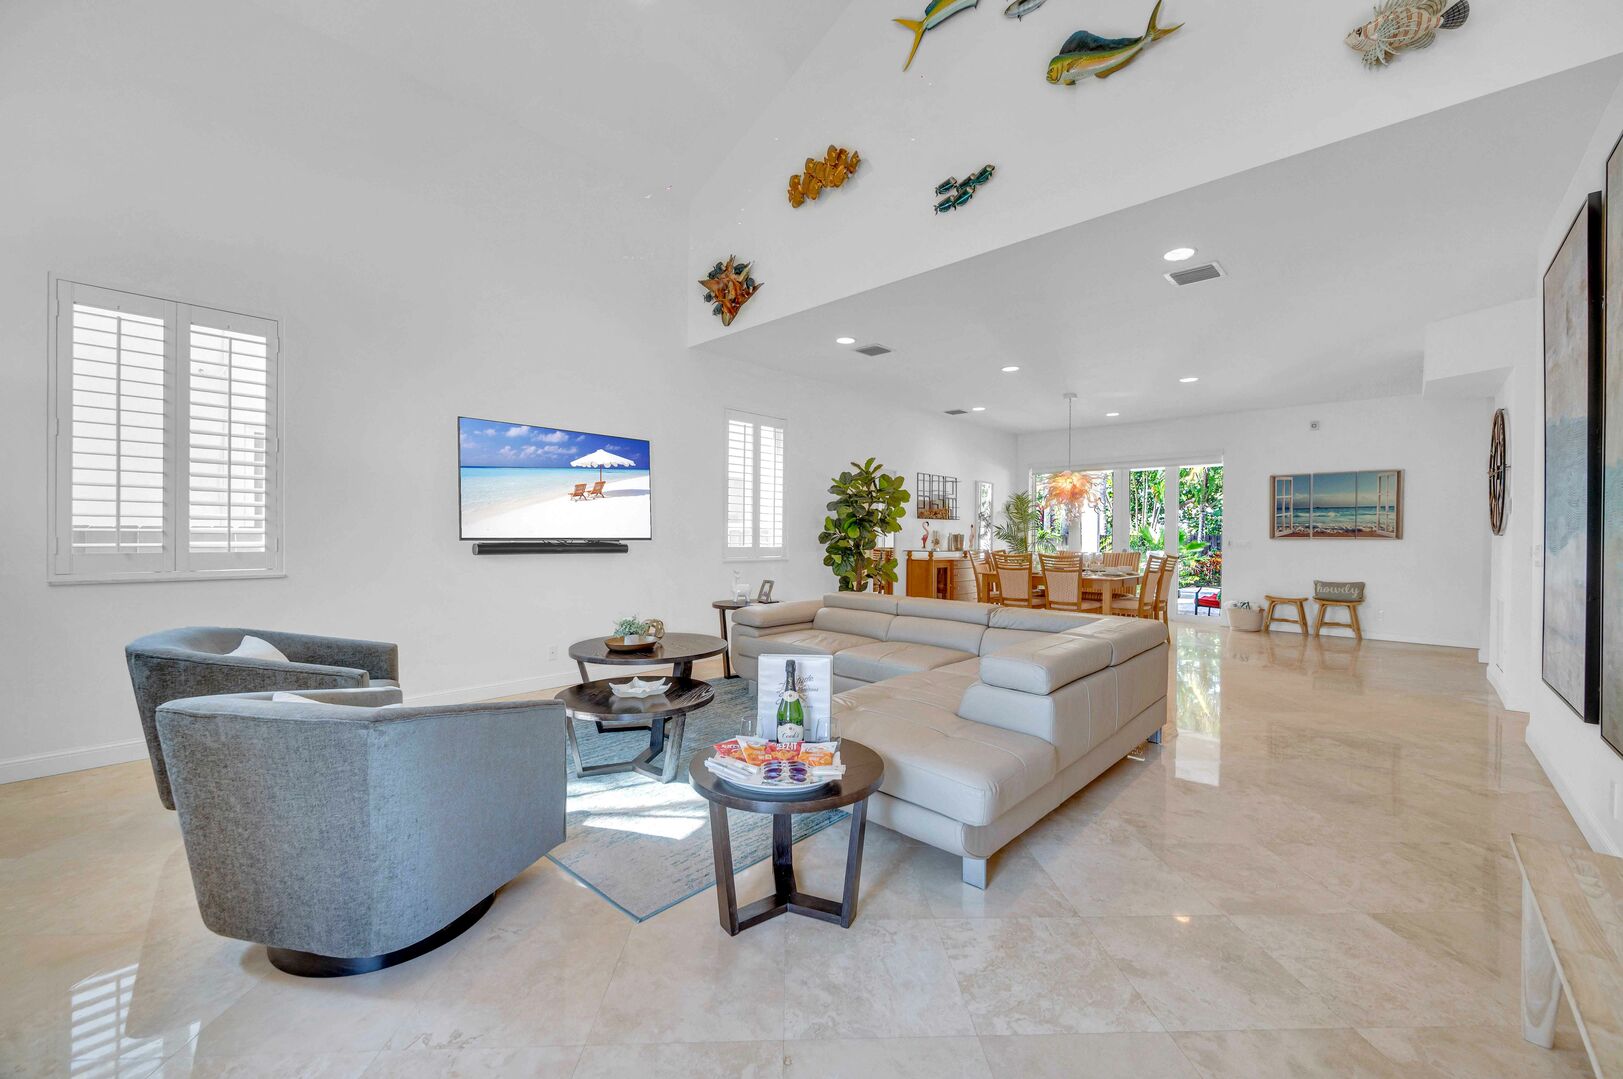 When you first enter, you will be greeted by the spacious living area of the Sun Key.